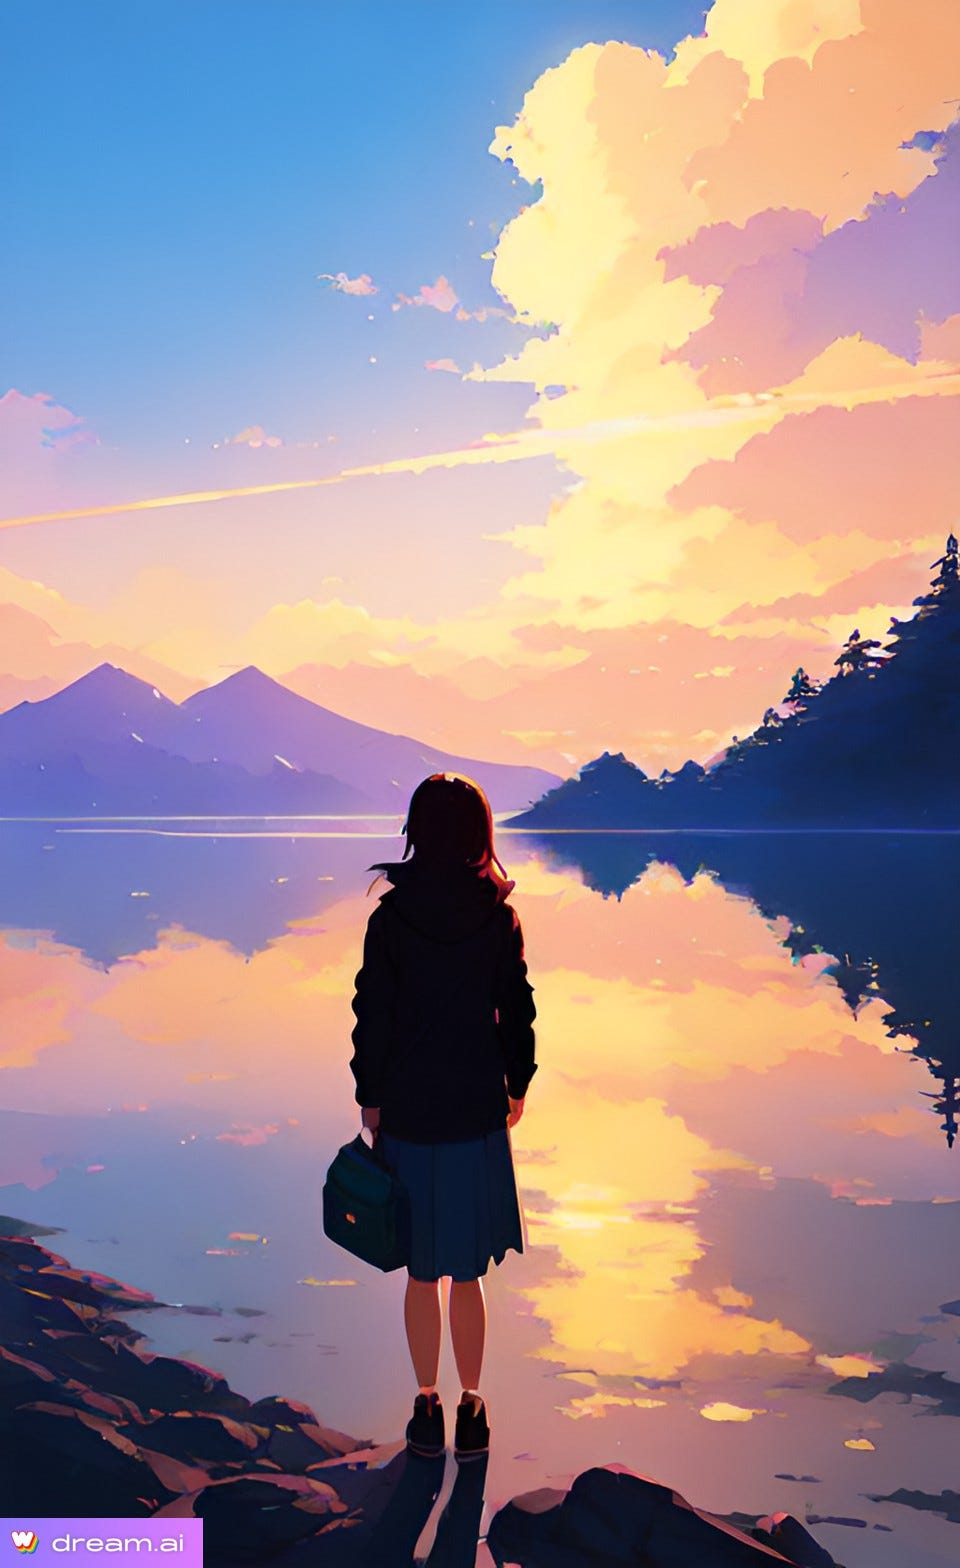 anime style AI image of a woman holding a bag at her side, standing at the edge of a mountain lake.